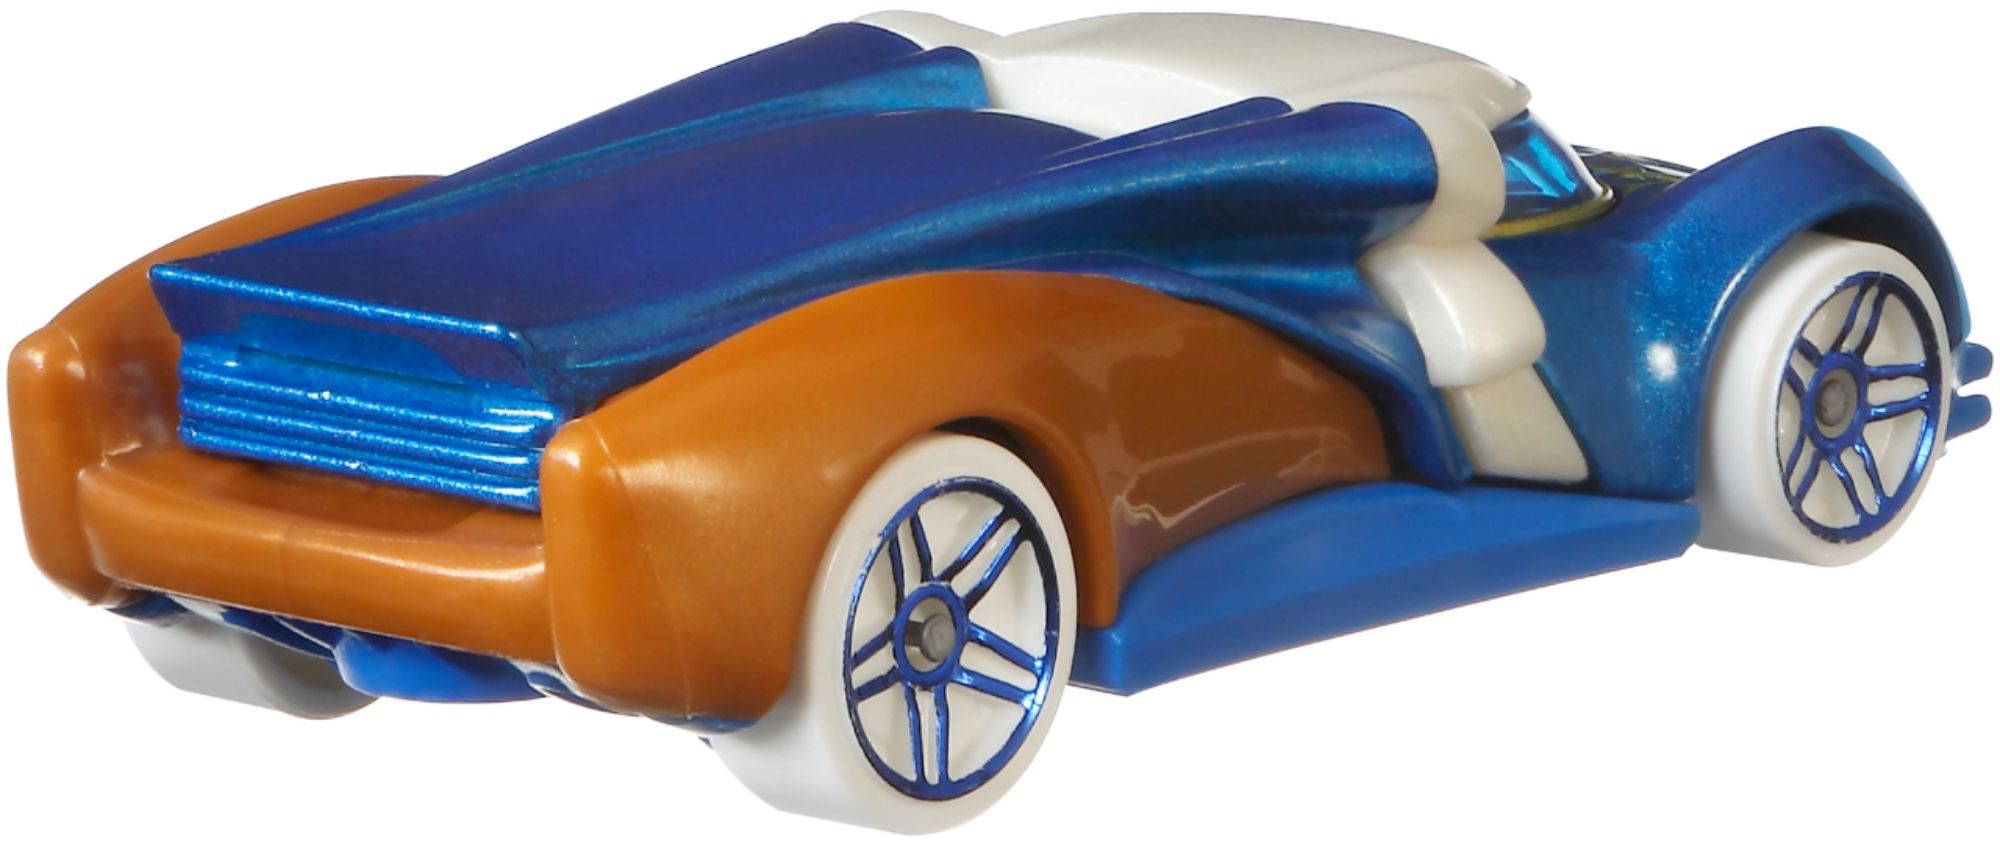 Hot Wheels Orange and Blue 1:64 Scale Vehicles *CHOOSE YOUR FAVOURITE* 